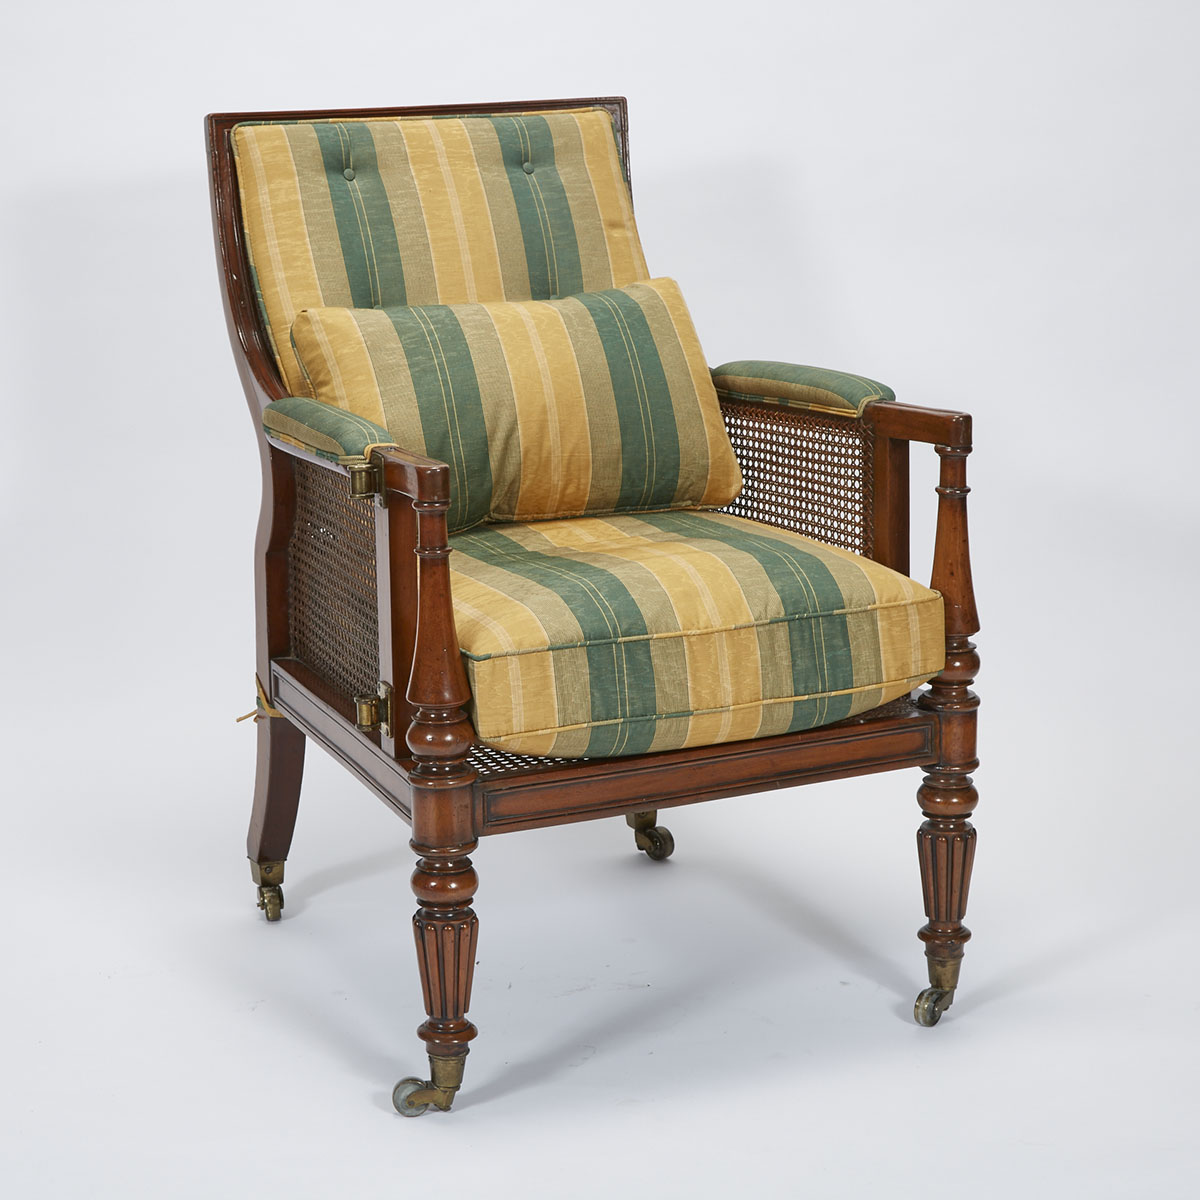 George IV Caned Mahogany Library Chair, c.1825